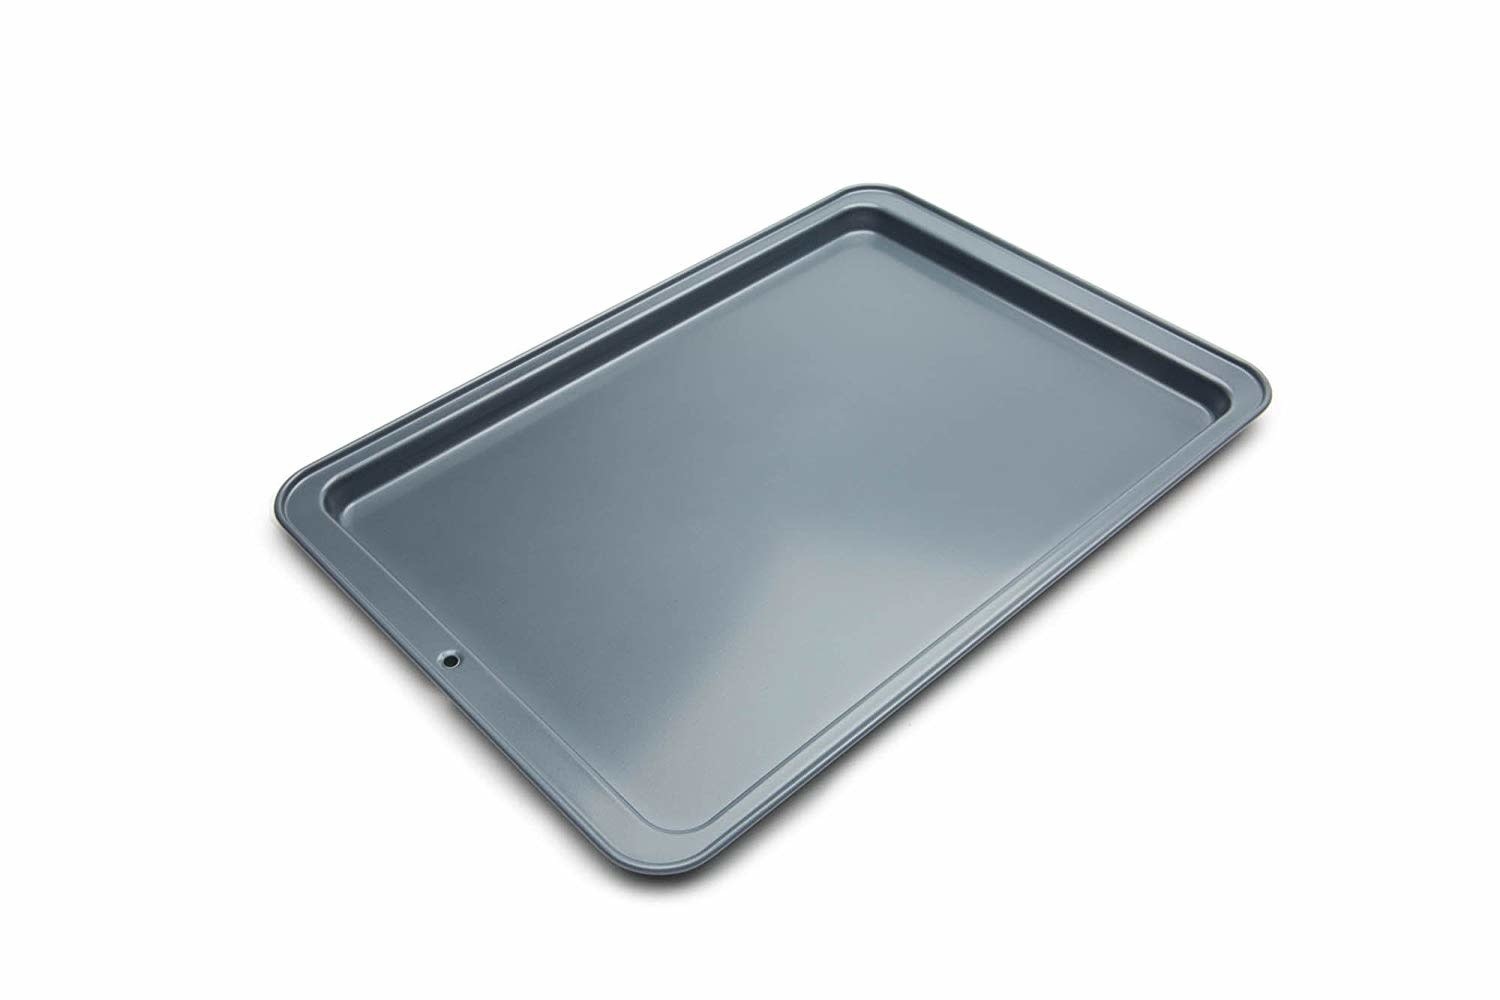 Jelly Roll Pan by USA Pan 13 x 18